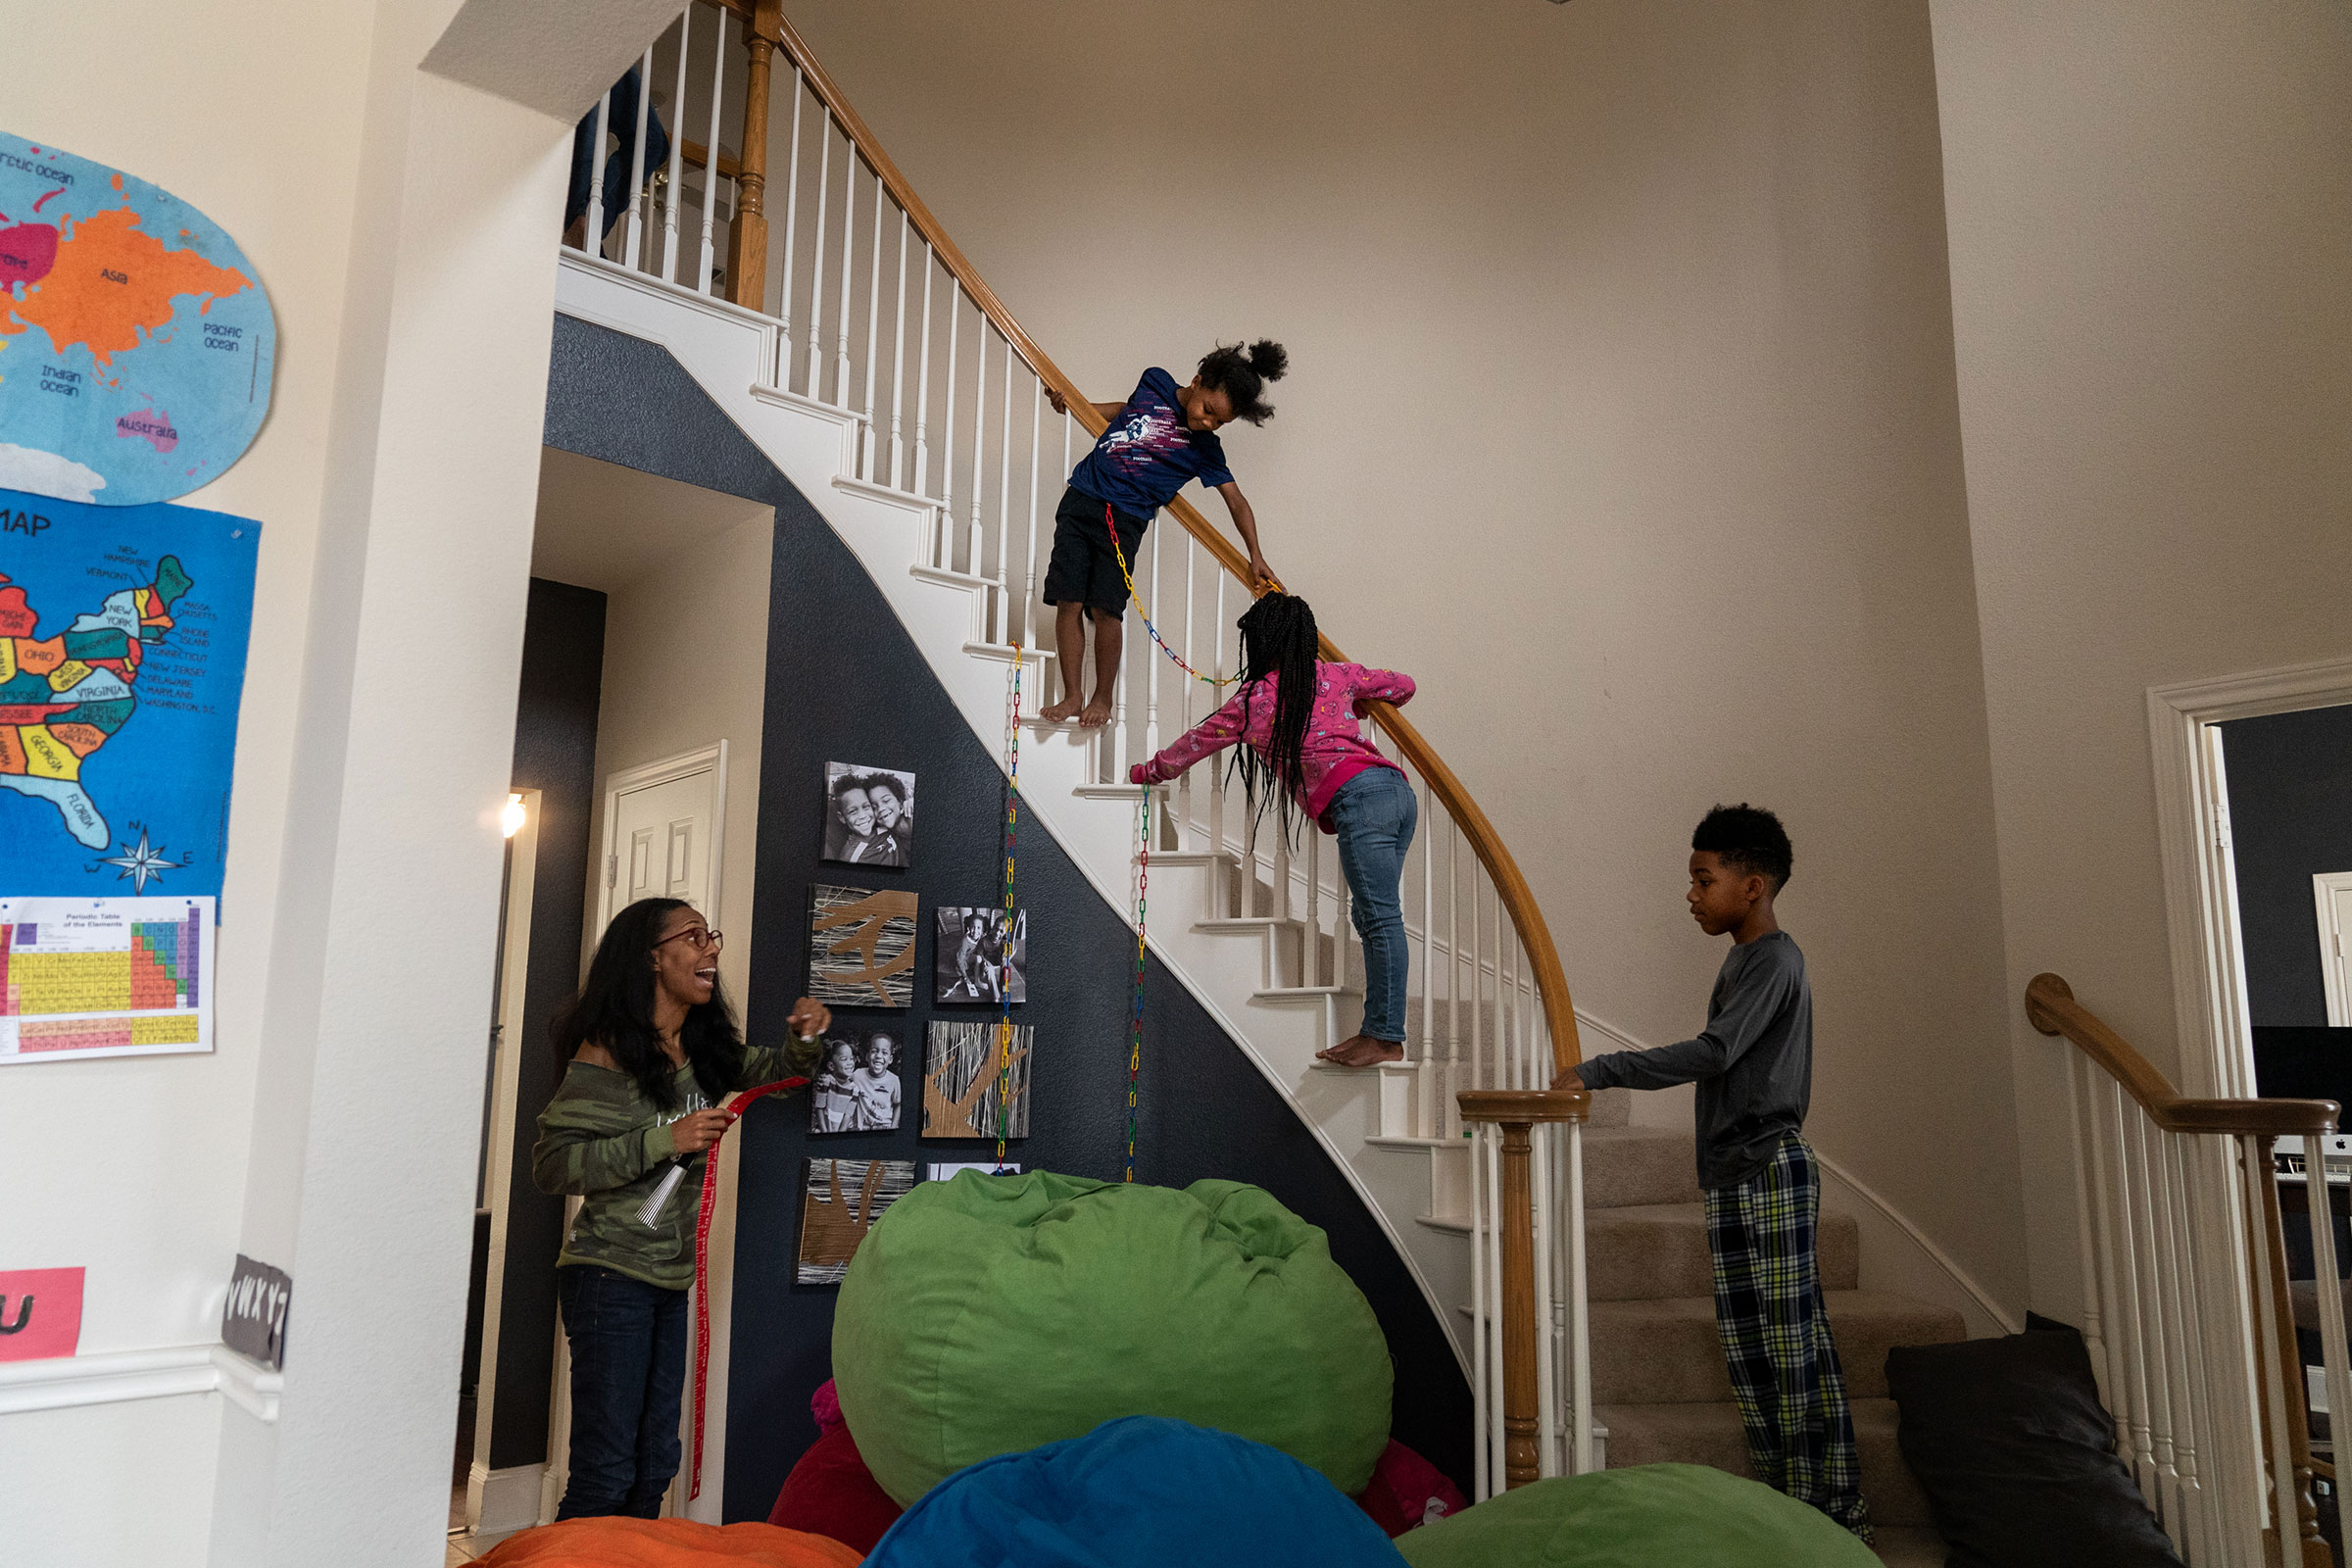 RICHARDSON, TEXAS - February 23, 2022: Brax, 6; Bellamy, 8; and Brice, 10, play on the stairs while their mom Andrea wrangles kids to help with a lesson for the younger siblings. Ilana Panich-Linsman for TIME